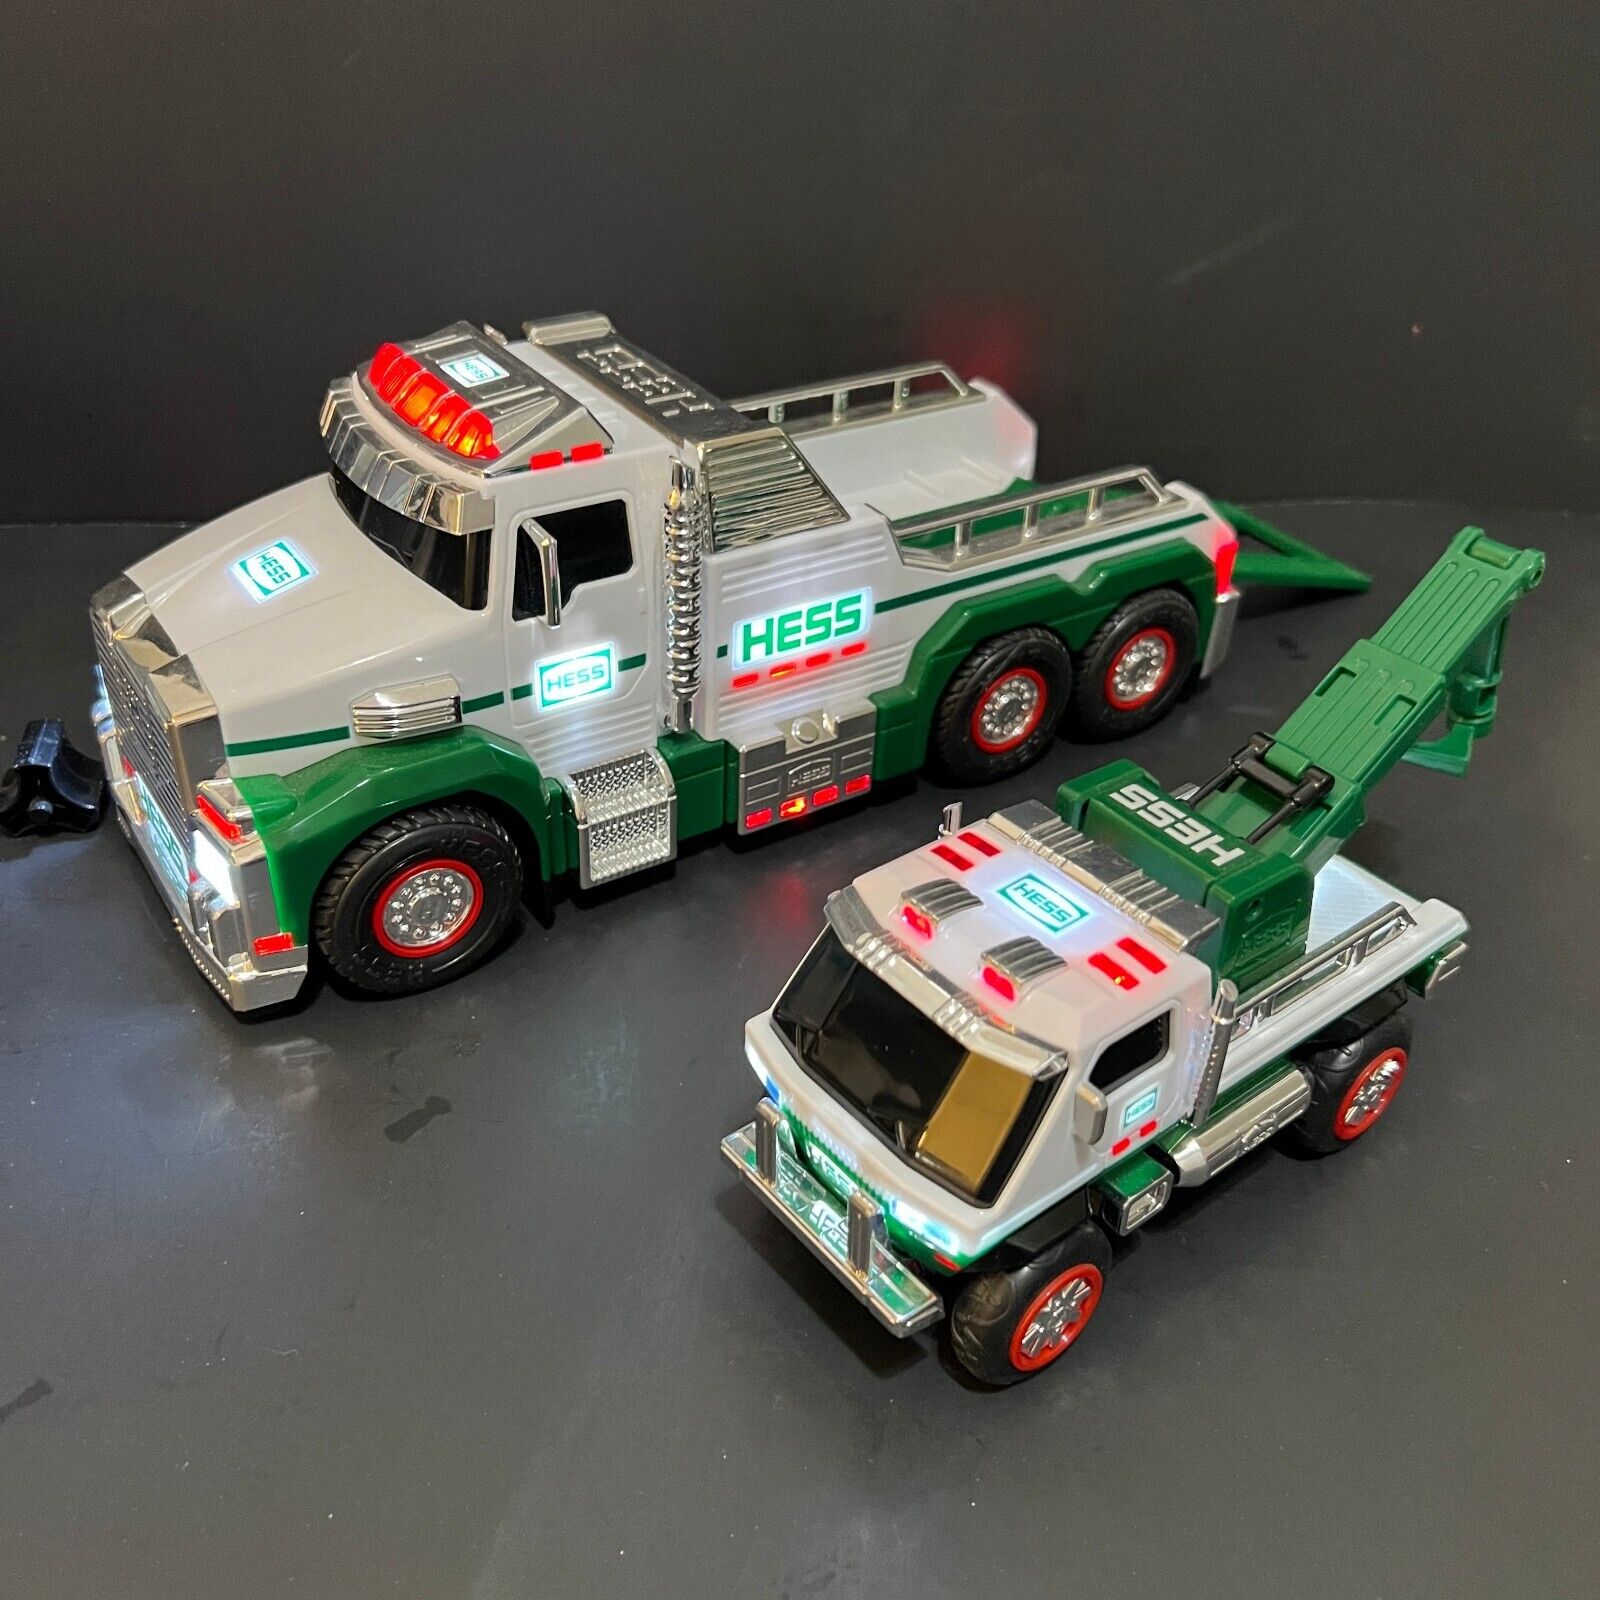 Hess 2019 Toy Tow Truck Rescue Team With Lights and Sounds No Box